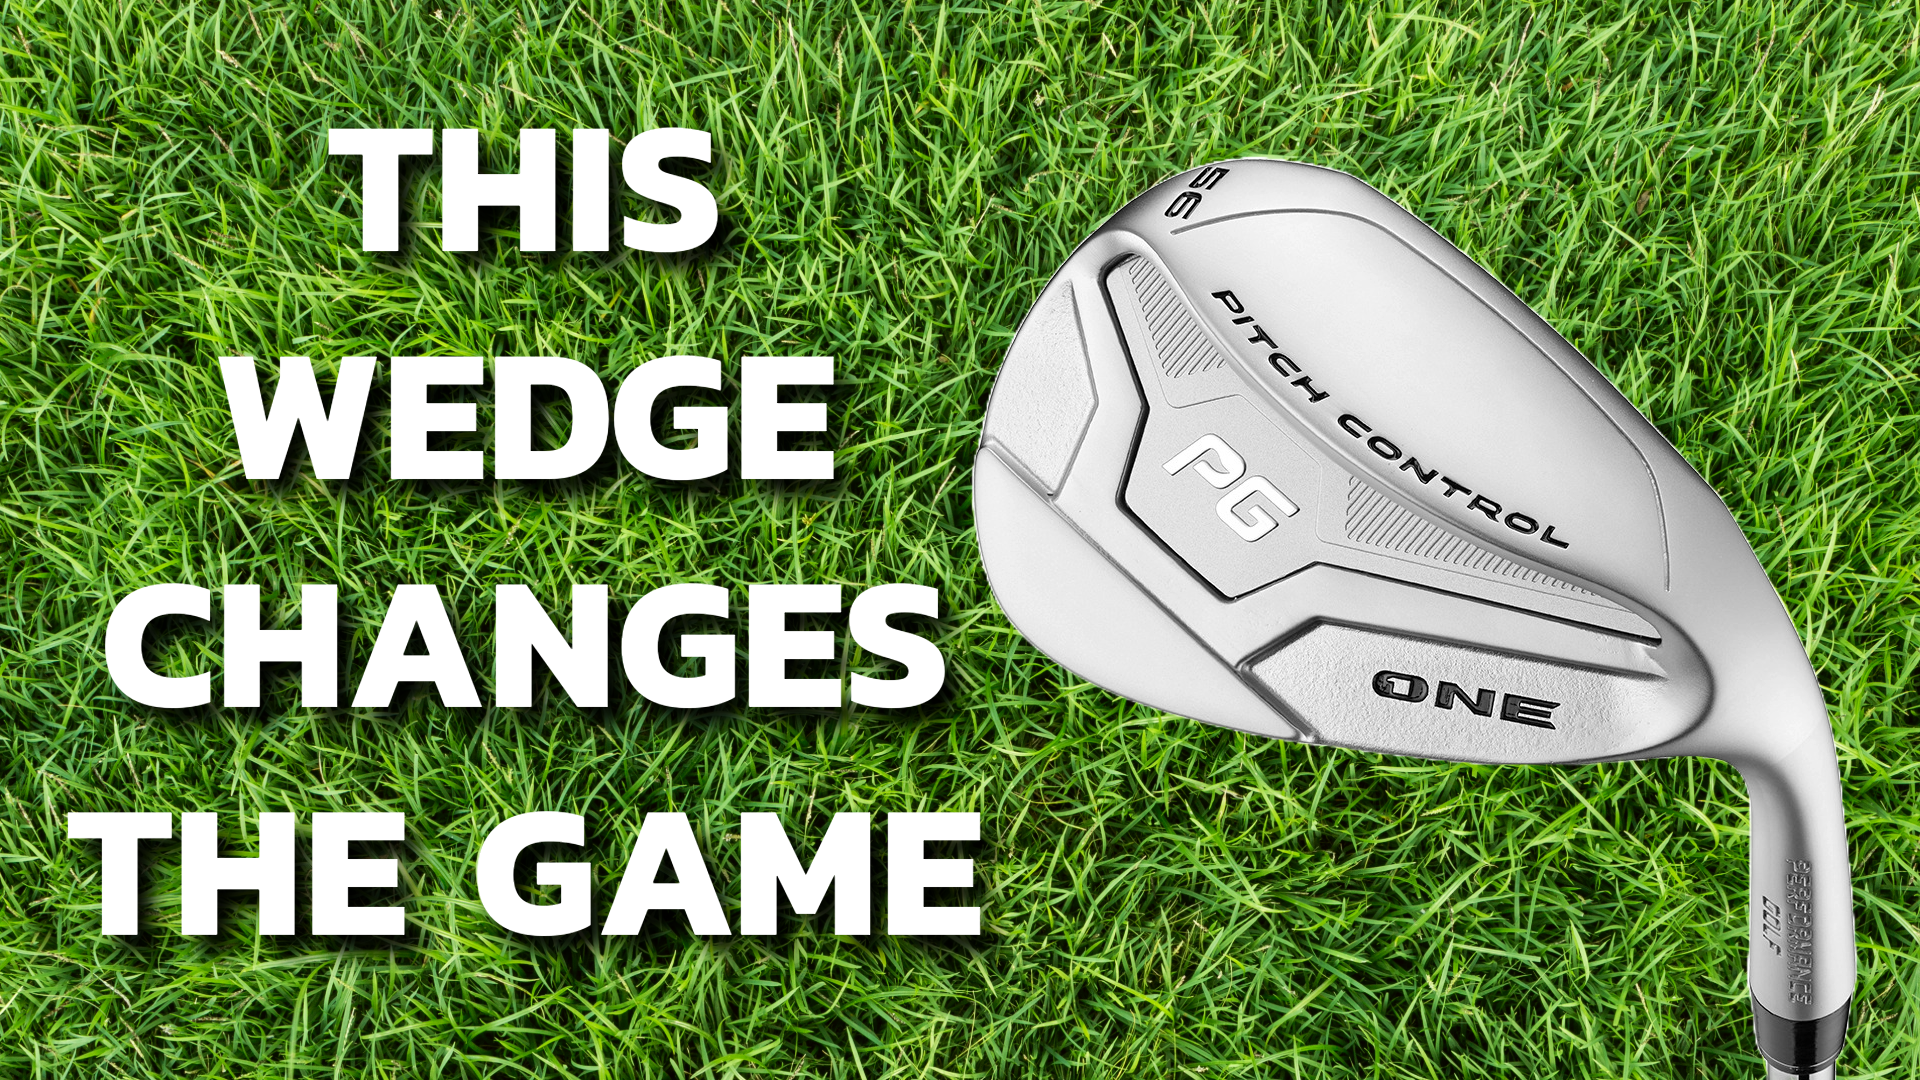 This wedge changes the game